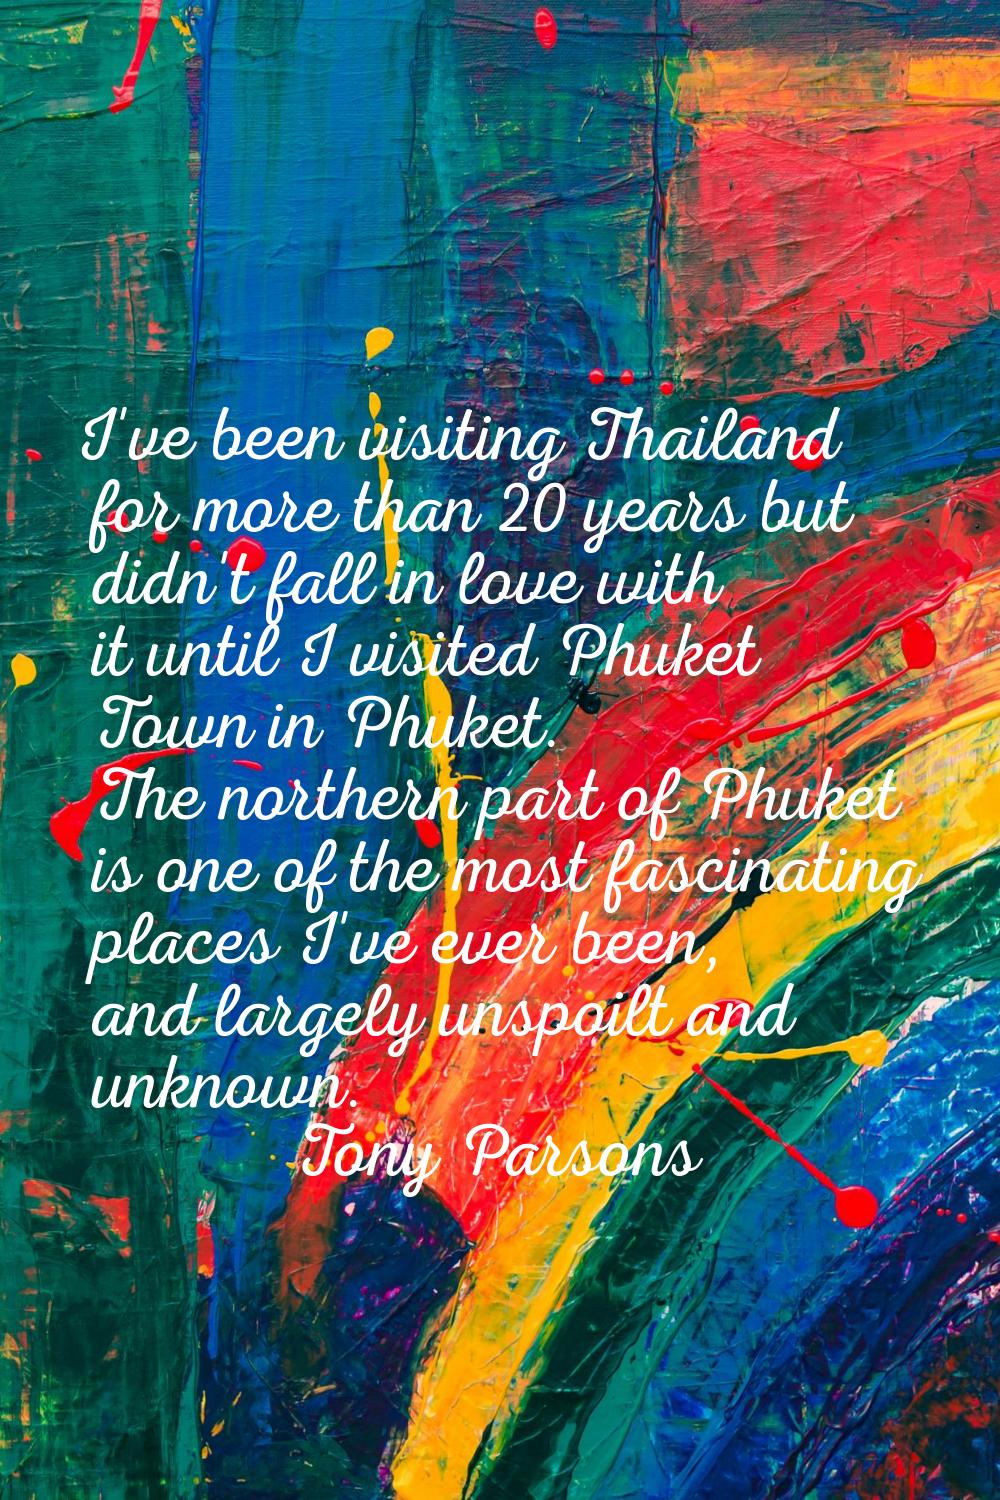 I've been visiting Thailand for more than 20 years but didn't fall in love with it until I visited 